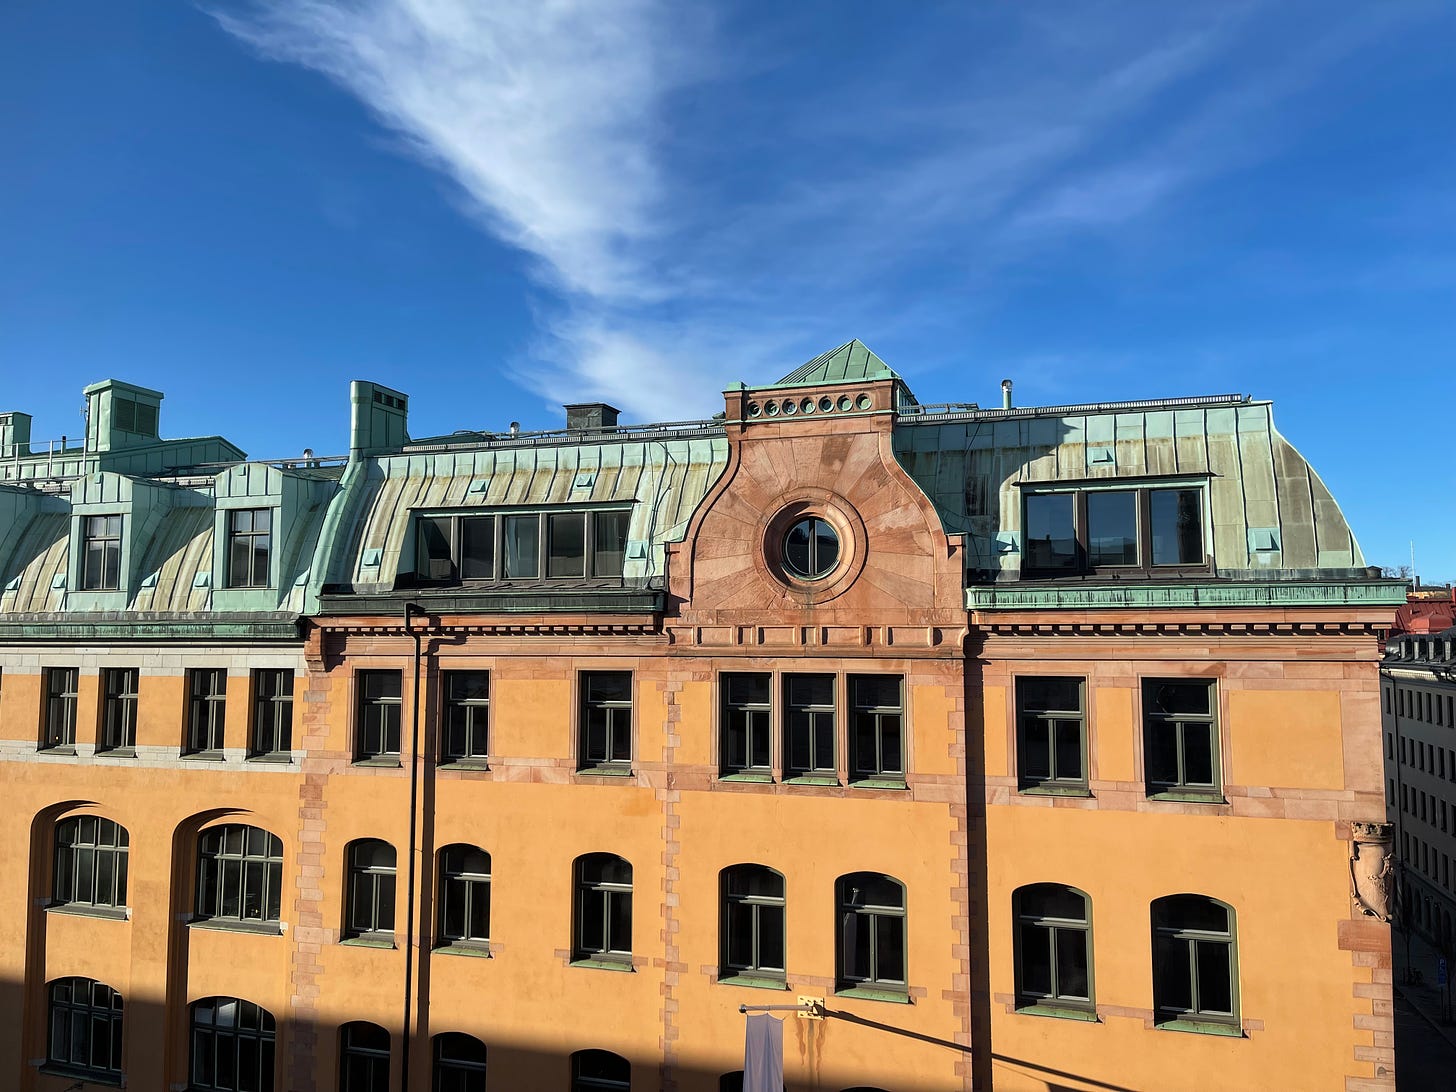 An 1800s building in yellows and pale orange with a light green metal roof, with windows in the roof and rectangular windows at regular intervals from a 6th floor window. Blue sky and a wispy white cloud above the building